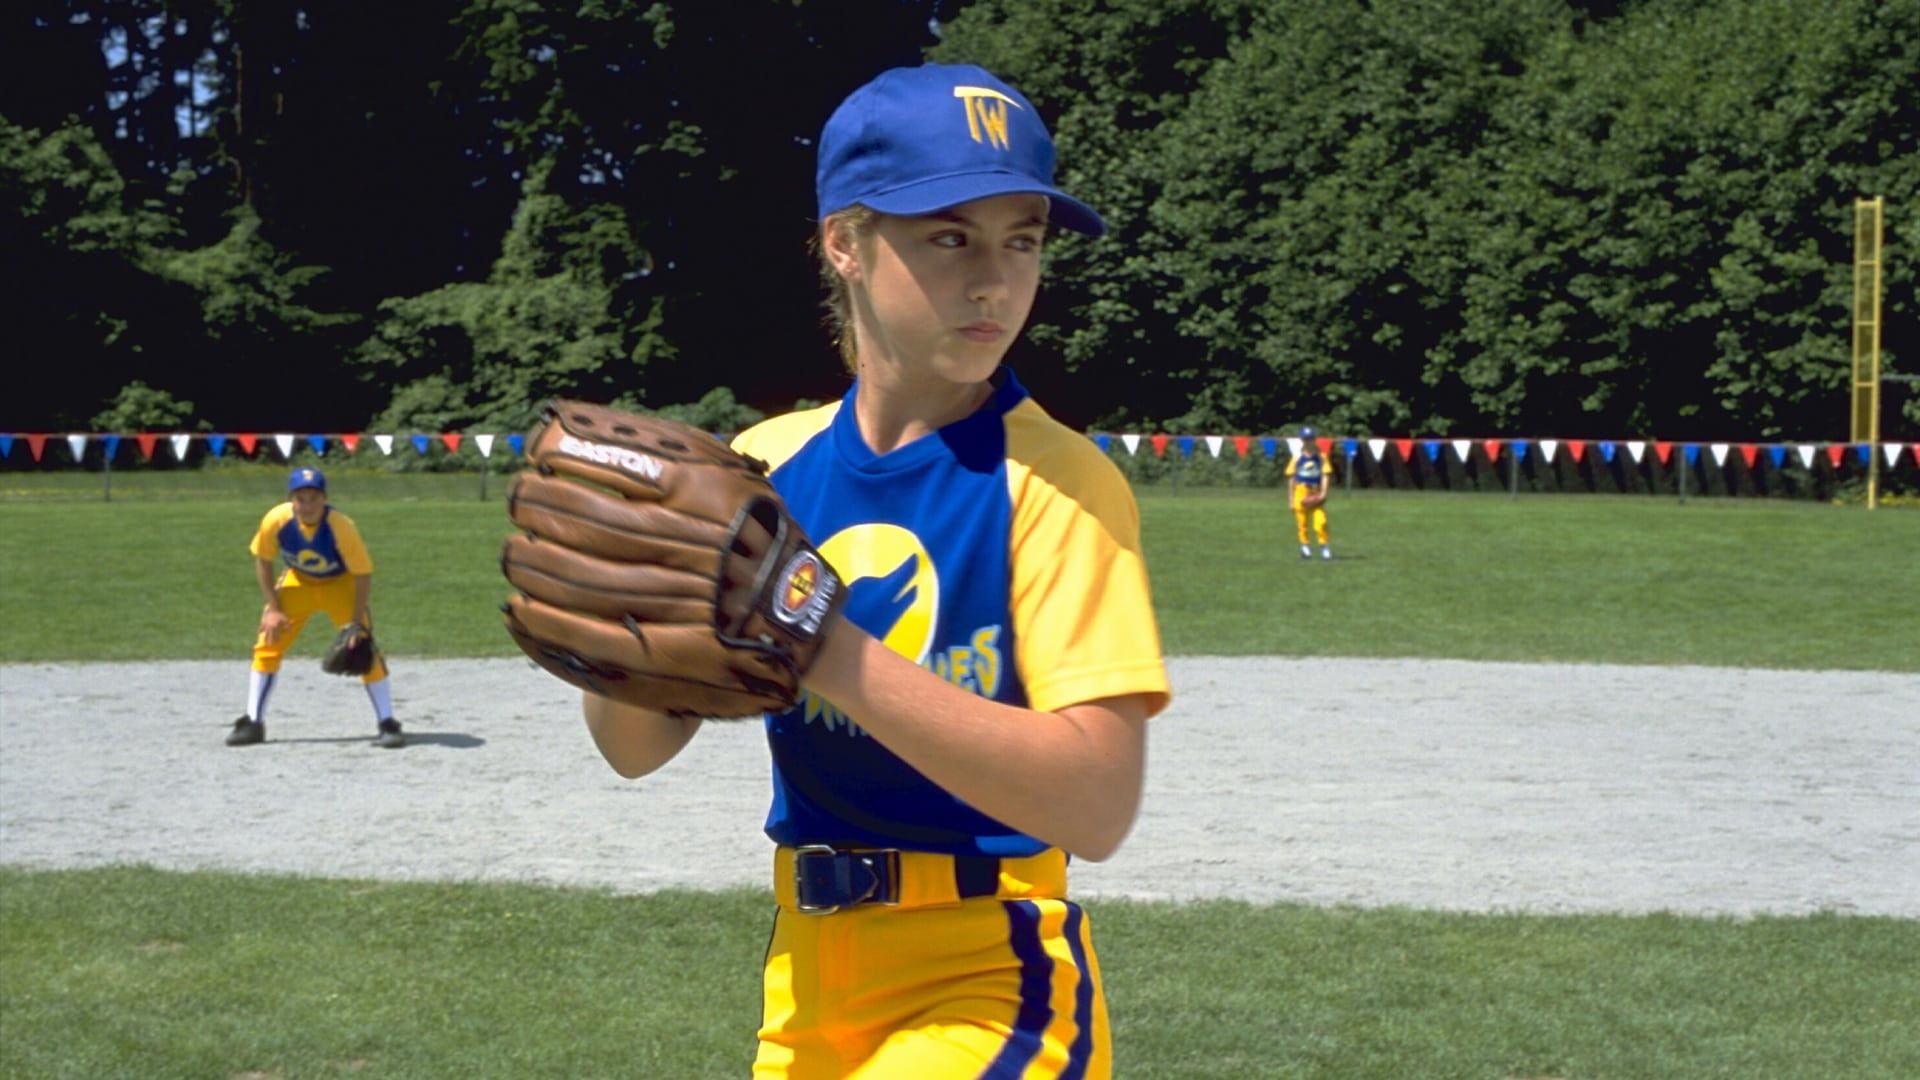 Air Bud: Seventh Inning Fetch background